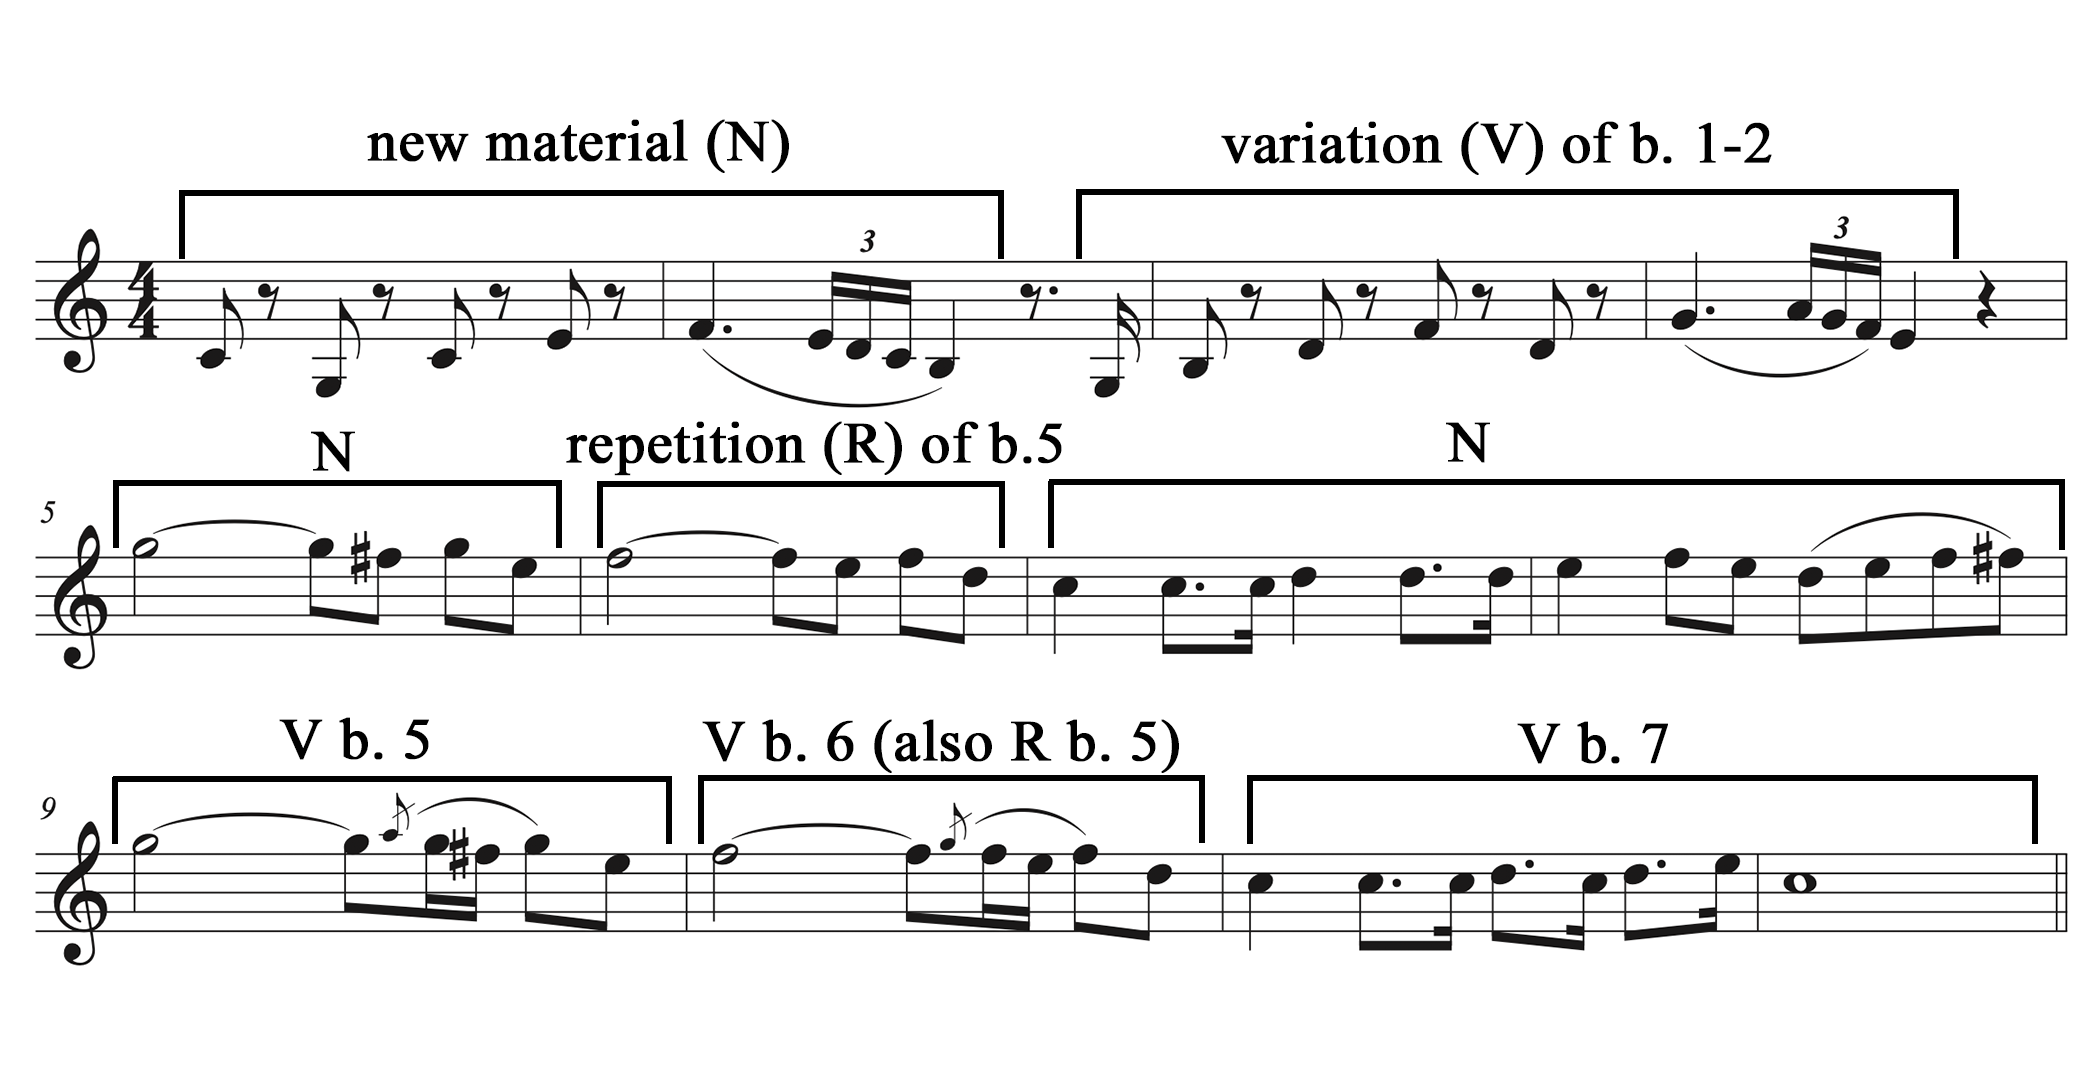 Mozart excerpt with new material, variations, and repetitions bracketed in the score.